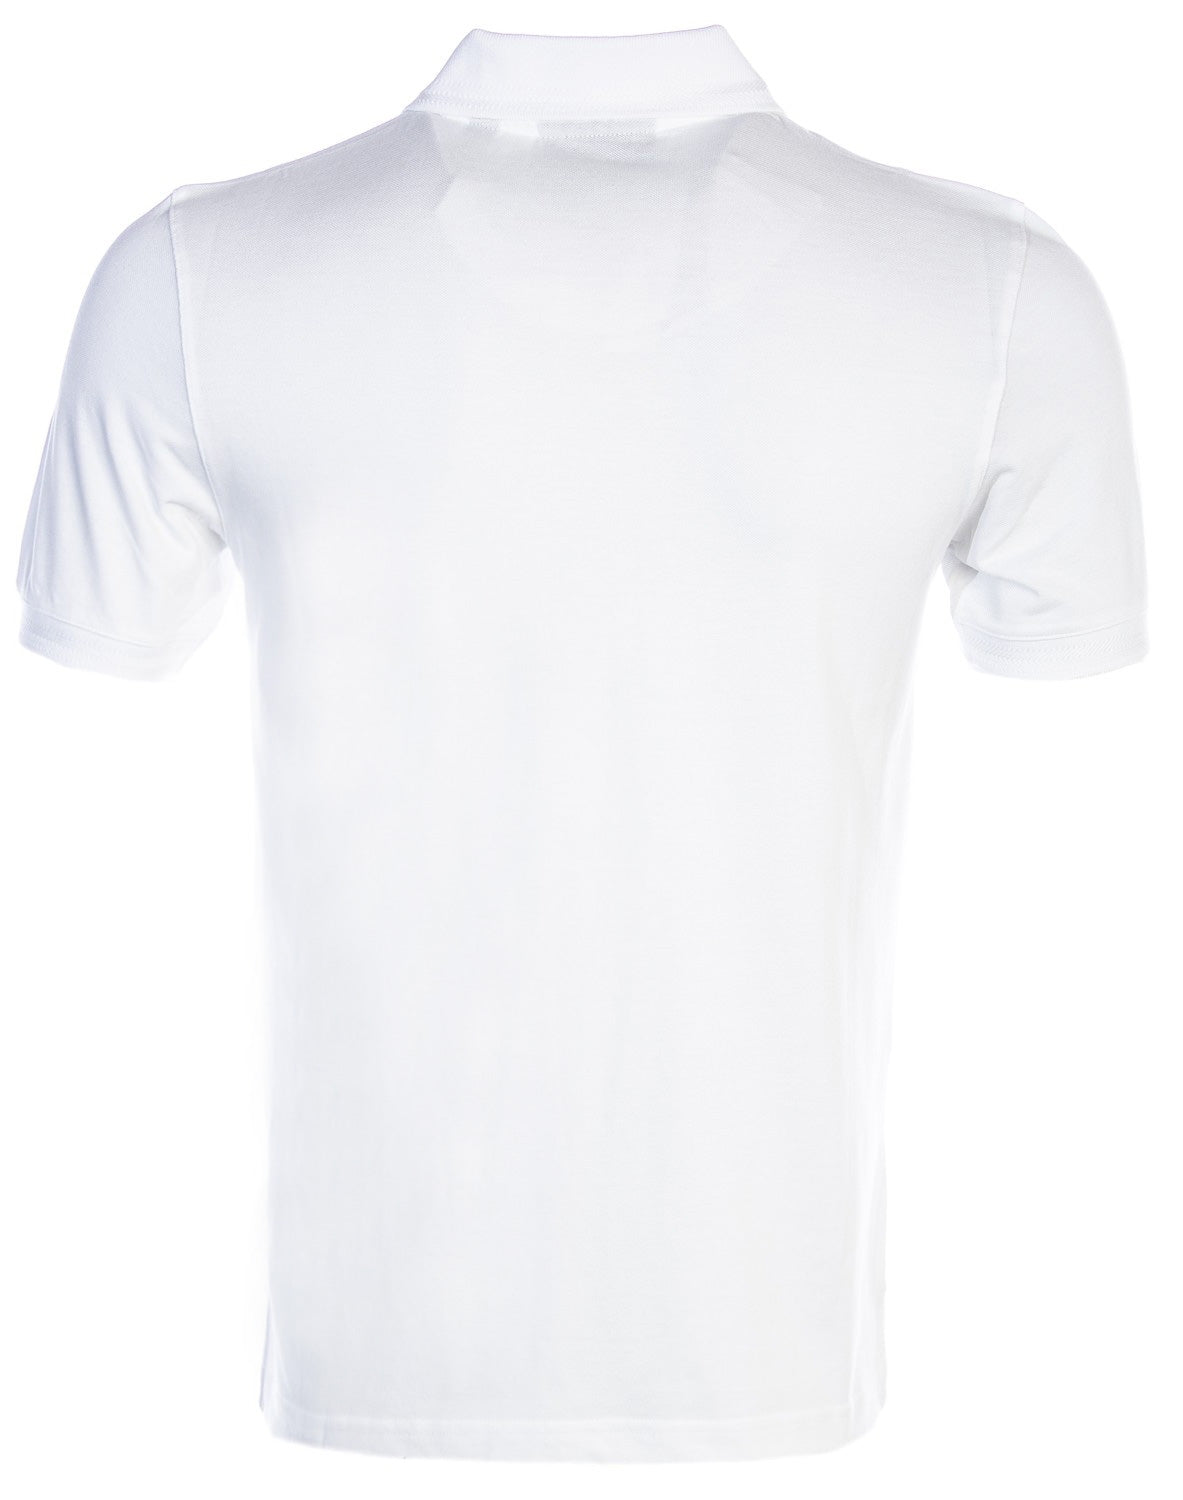 Belstaff Classic Short Sleeve Polo Shirt in White